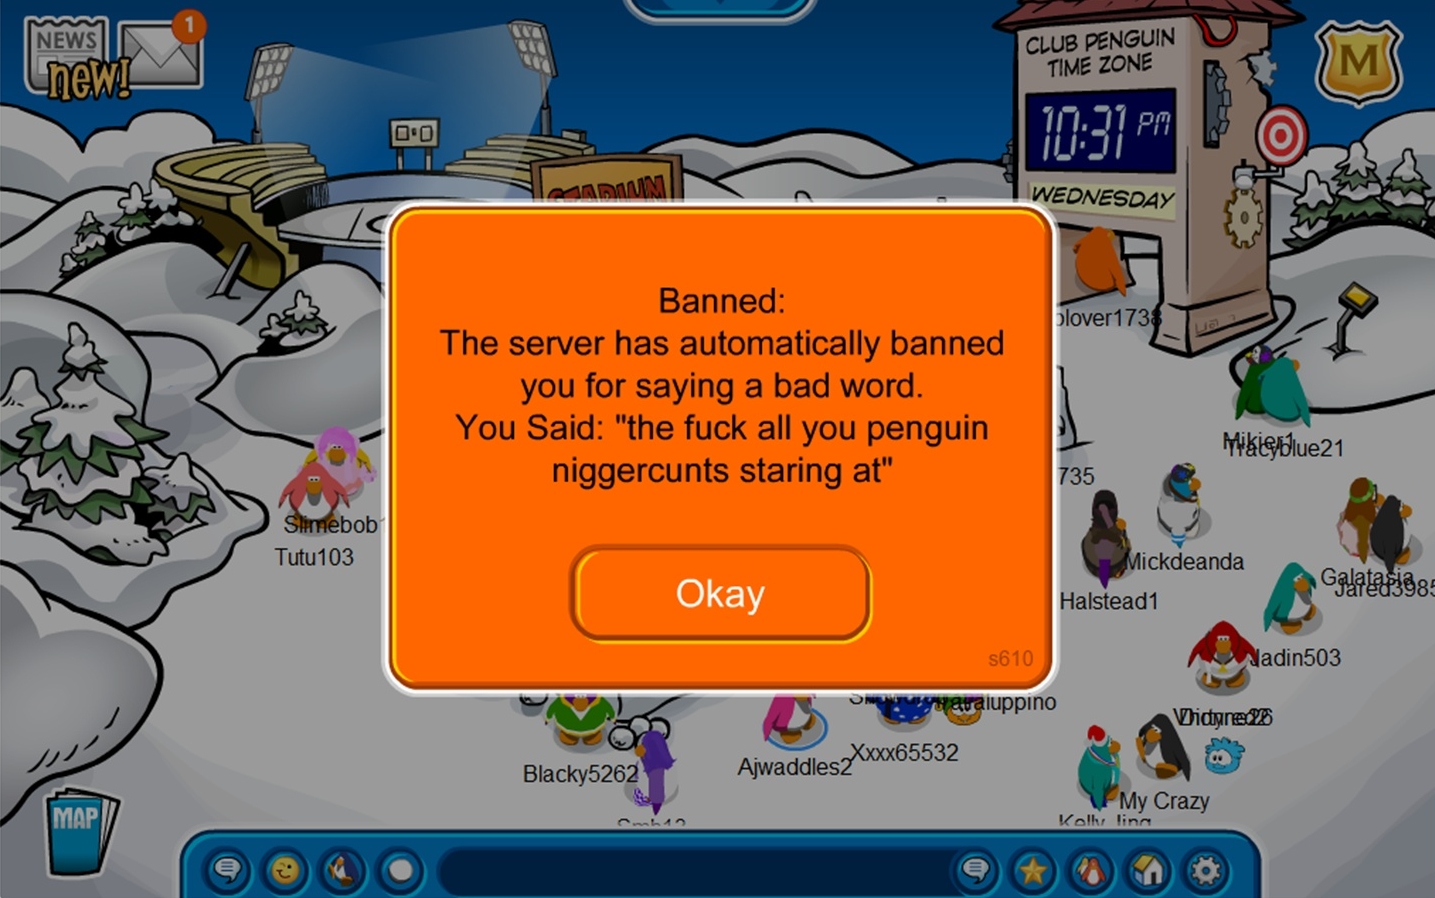 Page 2 of comments at Club Penguin ban